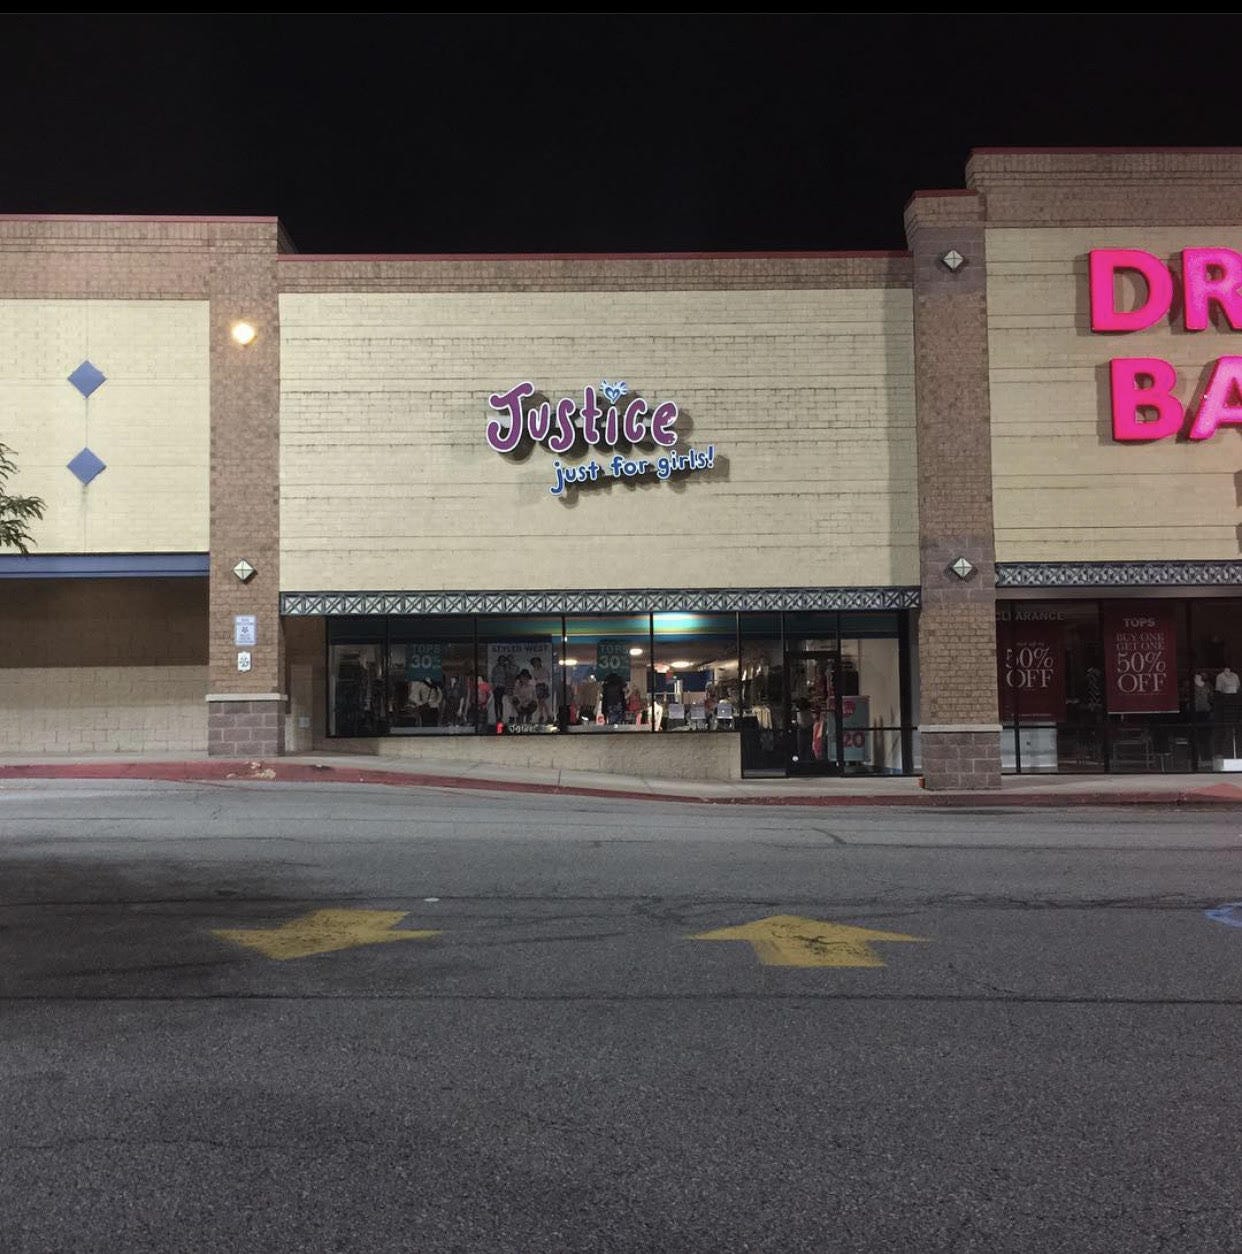 A storefront that is called "Justice" with a phrase underneath reading "just for girls." The picture shows the store with its lights off.